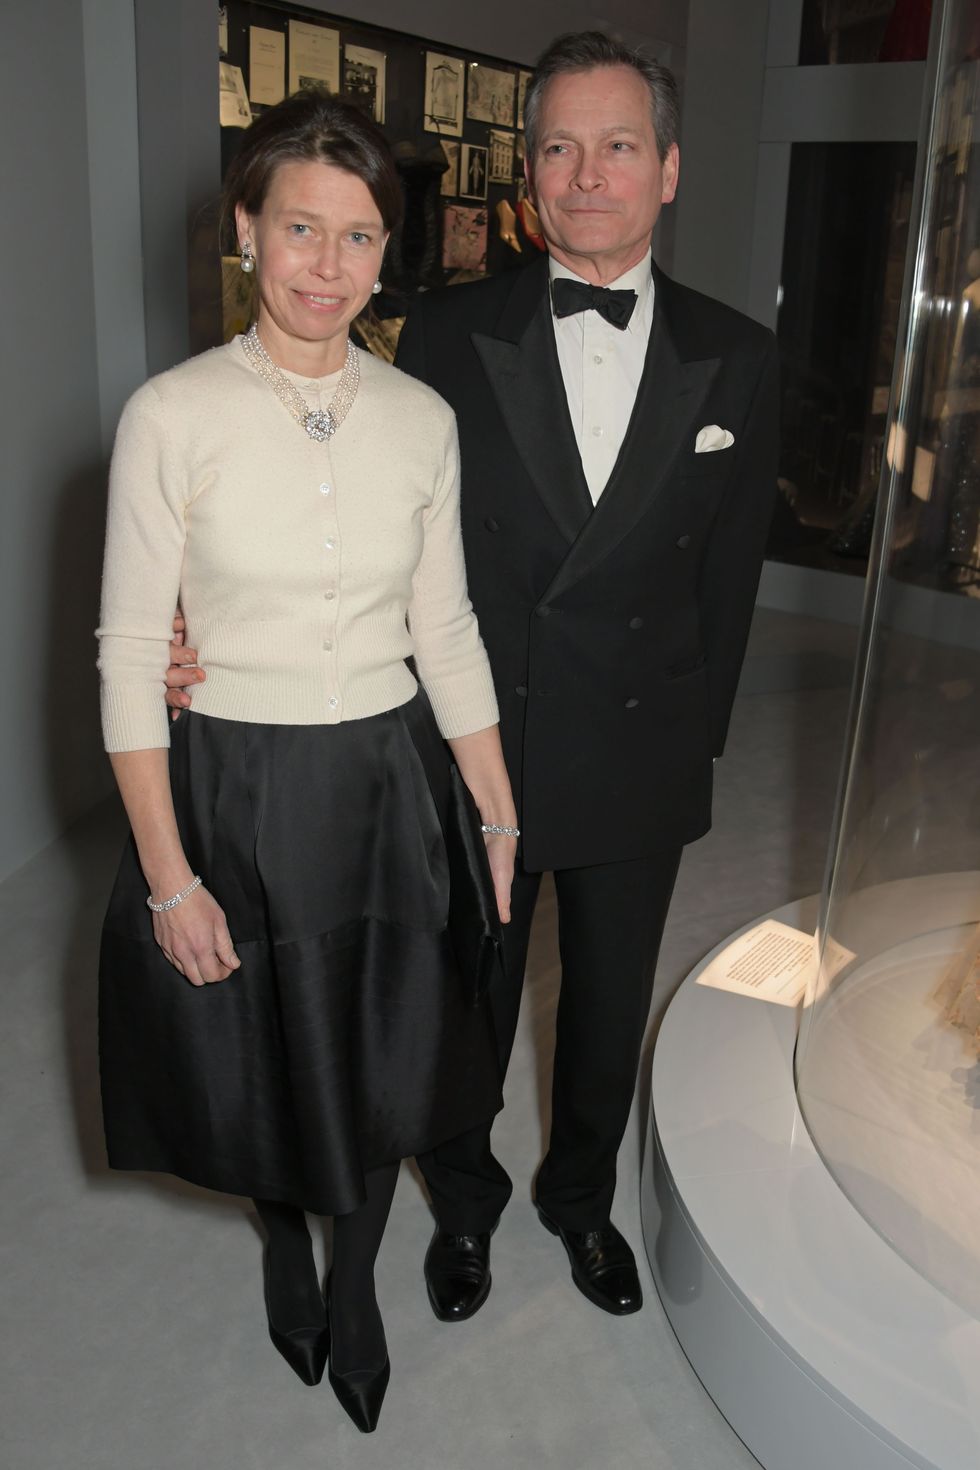 "Christian Dior: Designer of Dreams" Exhibition At The V&A - Opening Gala Dinner